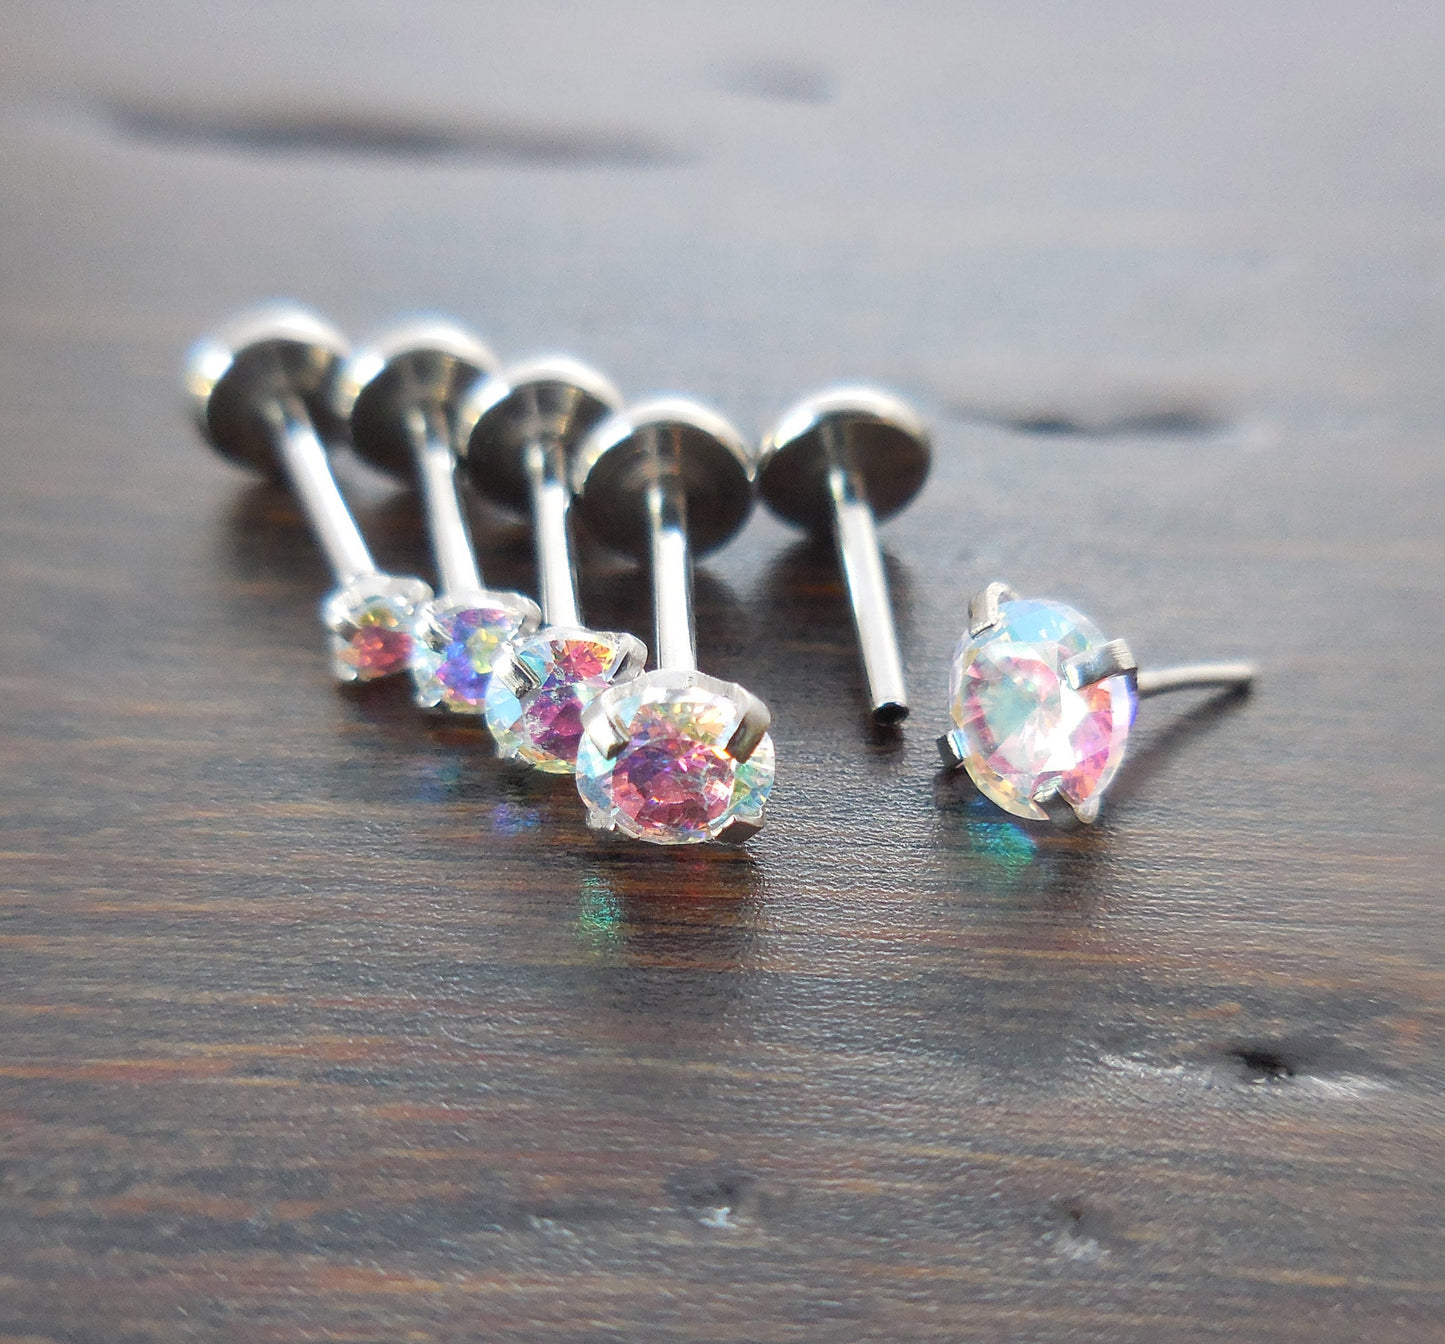 20G 2-4mm Tragus Threadless 6mm-8mm Push Pin Triple Helix Nose Ring Labret Lip Earrings Steel Prong Set AB Rainbow Auroral Borealis Crystal